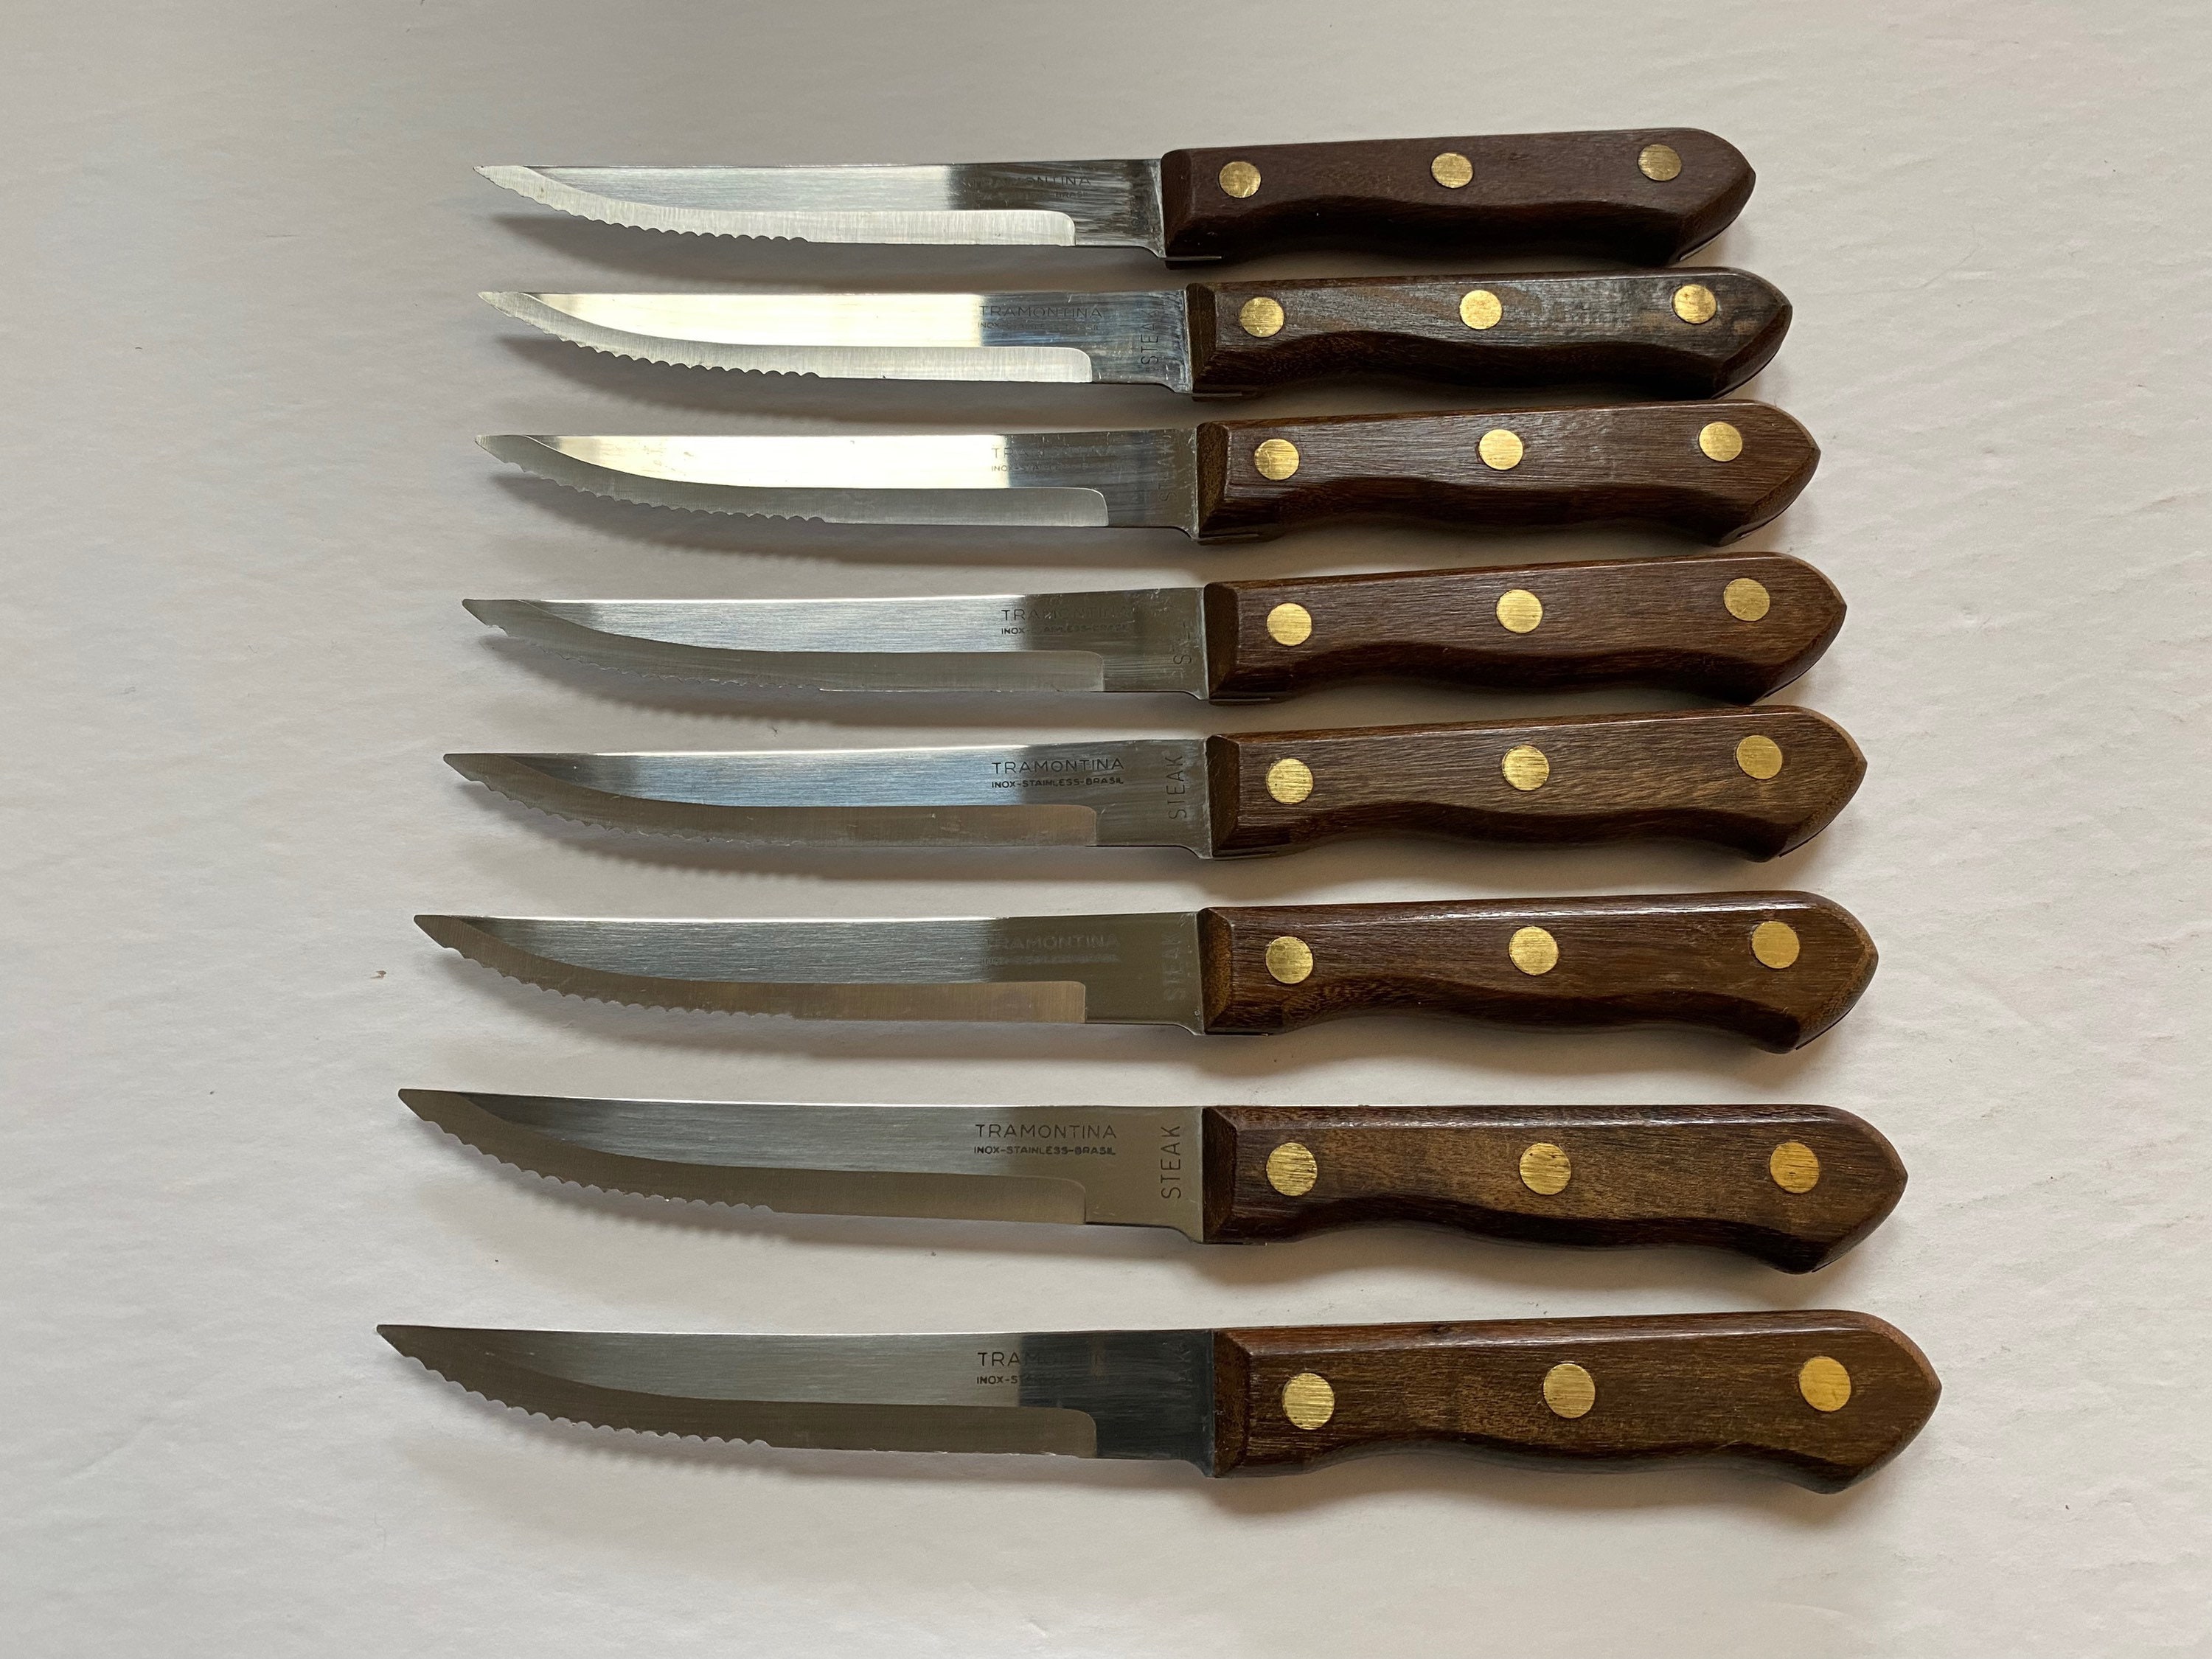 Tramontina Set of 8 Knives Inox Stainless Brasil Serrated Steel Blades Wood  Handle Brass Rivets Cutlery Kitchenware 